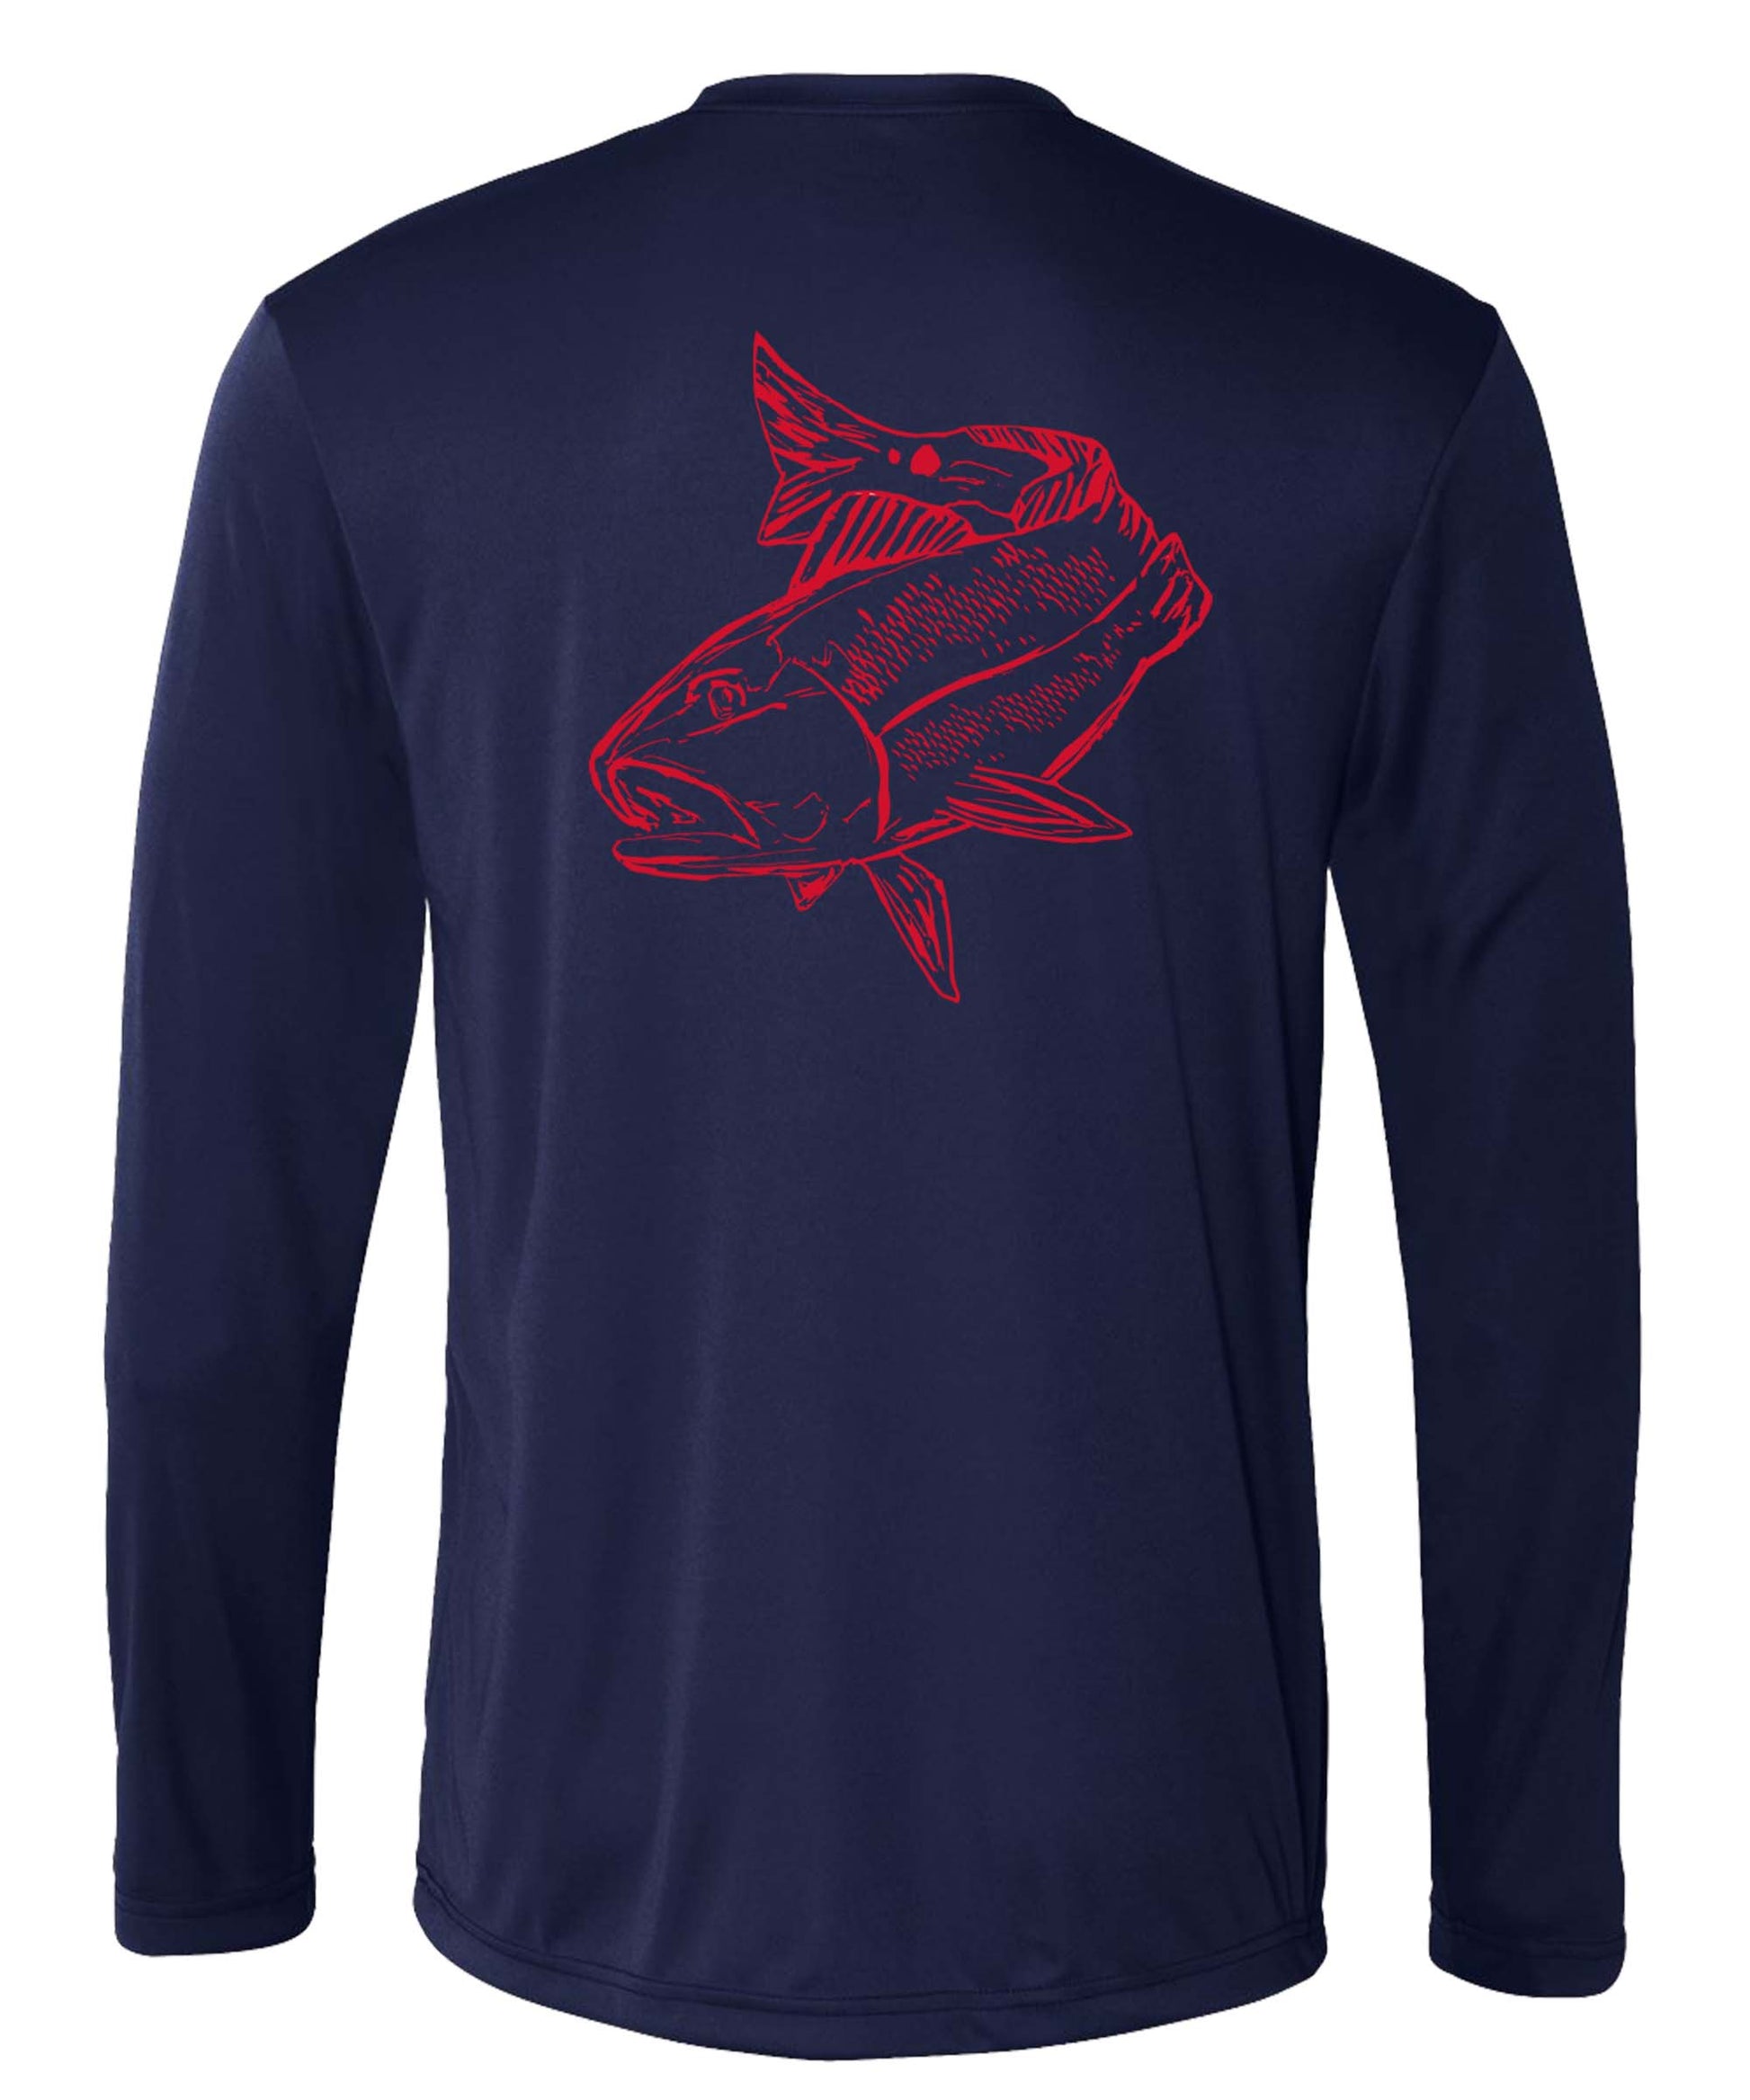 Redfish Performance Dry-Fit Fishing shirts with Sun Protection - Navy Long Sleeve